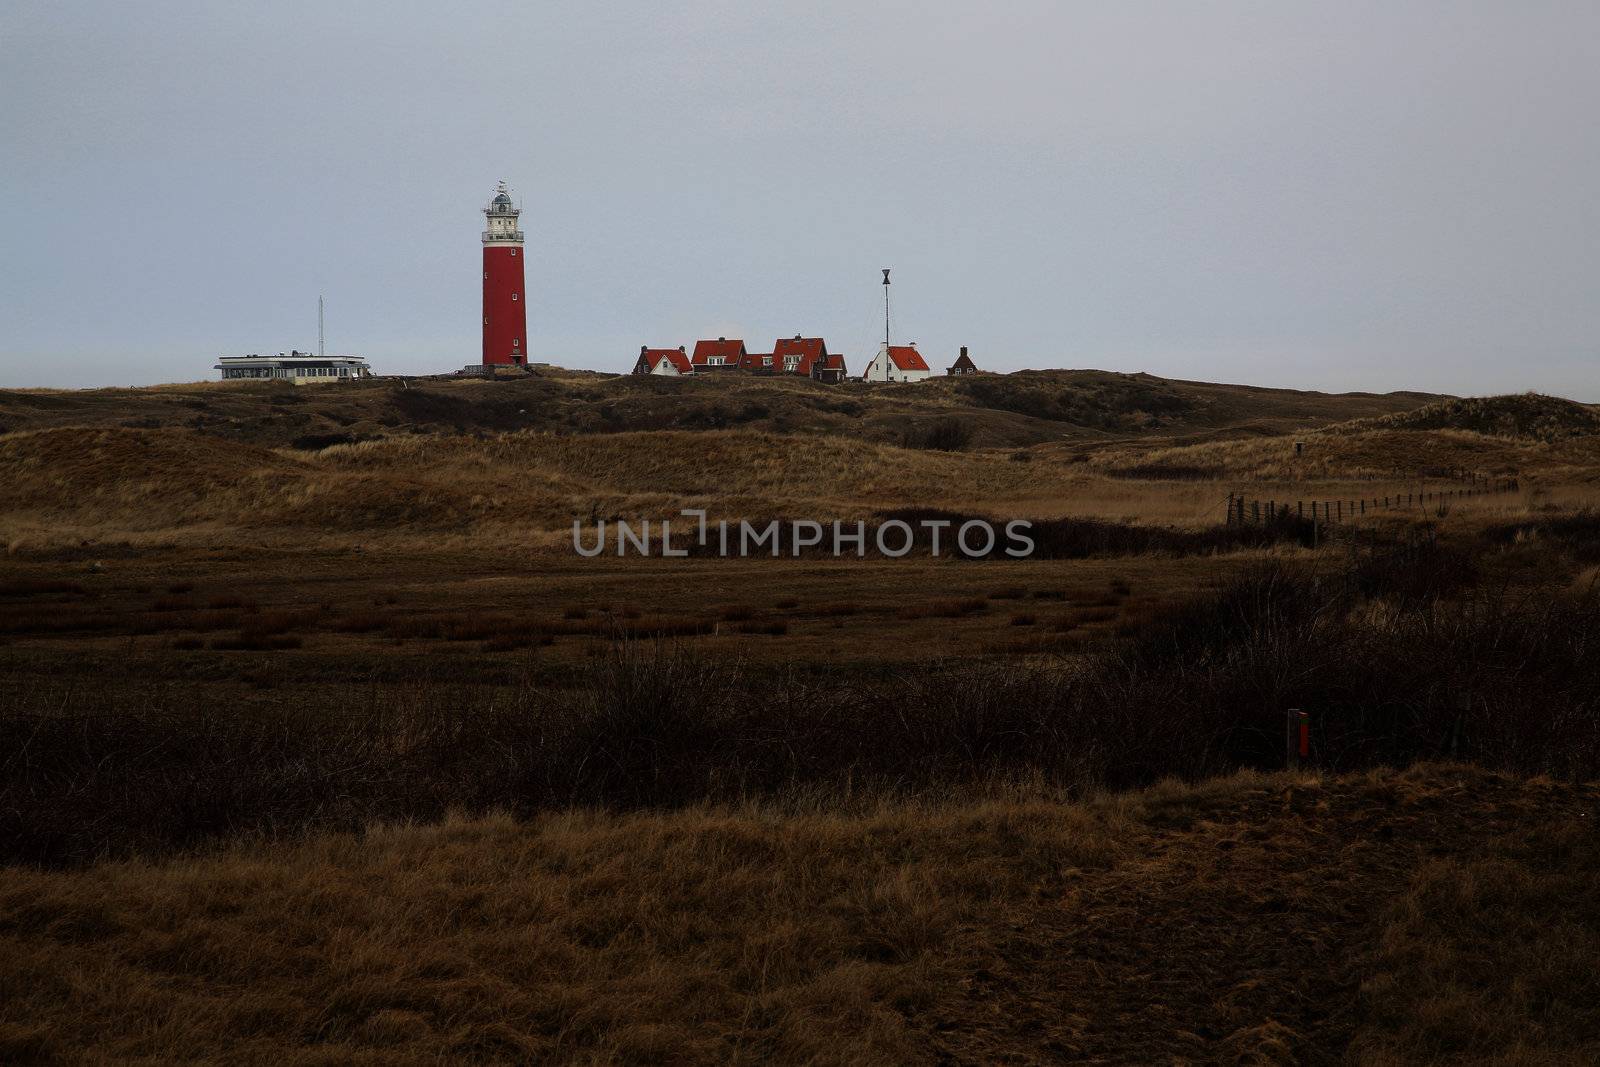 The famous red lighthouse in Cocksdorp - Texel - Netherlands